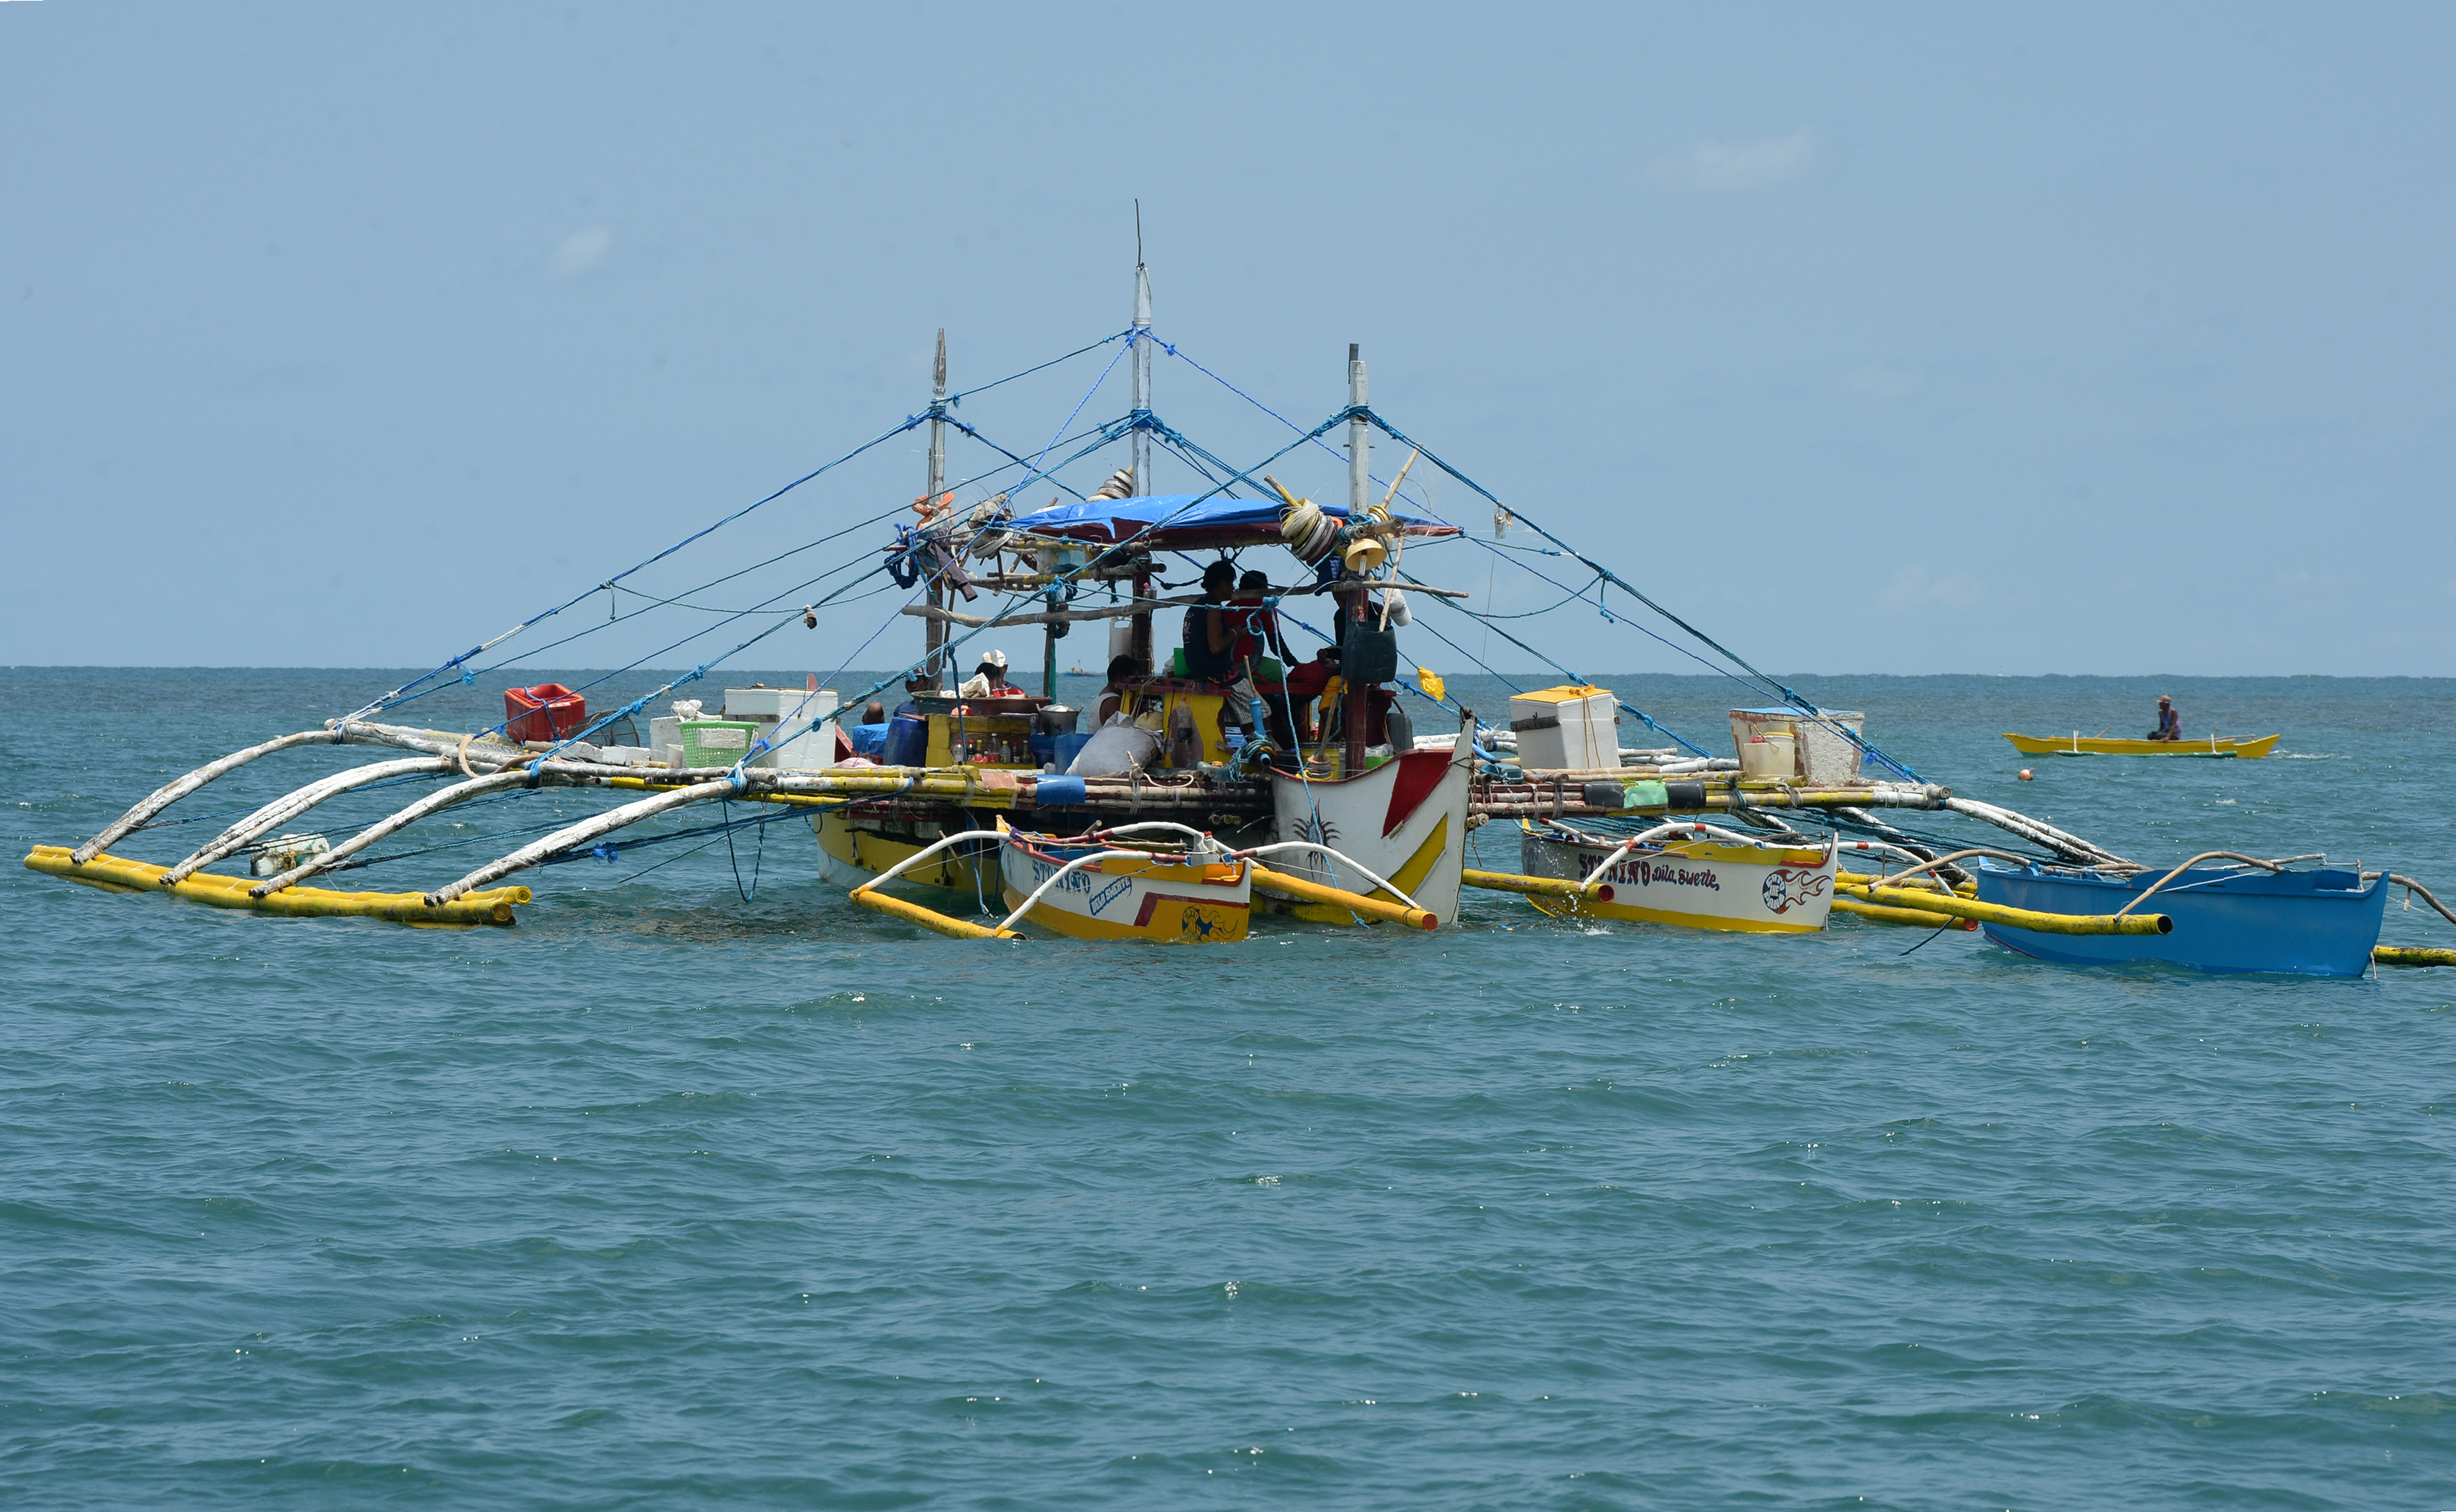 FILE PHOTO: This photo taken on June 16, 2016 shows a fishing vessel anchored at the mouth of the South China Sea off the town of Infanta in Pangasinan province, as they wait for their fishing expedition to Scarborough Shoal. A recent incident at the nearby Scarborough Shoal, a necklace of reefs and rocks some 230 kilometres (140 miles) off the main Philippine island of Luzon that Filipino fishermen say hosts some of the world's most abundant marine life, is part of a long-running territorial row that sits at the heart of a UN backed tribunal expected to rule in the coming weeks. / AFP PHOTO / TED ALJIBE / TO GO WITH Philippines-China-UN-maritime-diplomacy-fishing,FOCUS by Cecil Morella